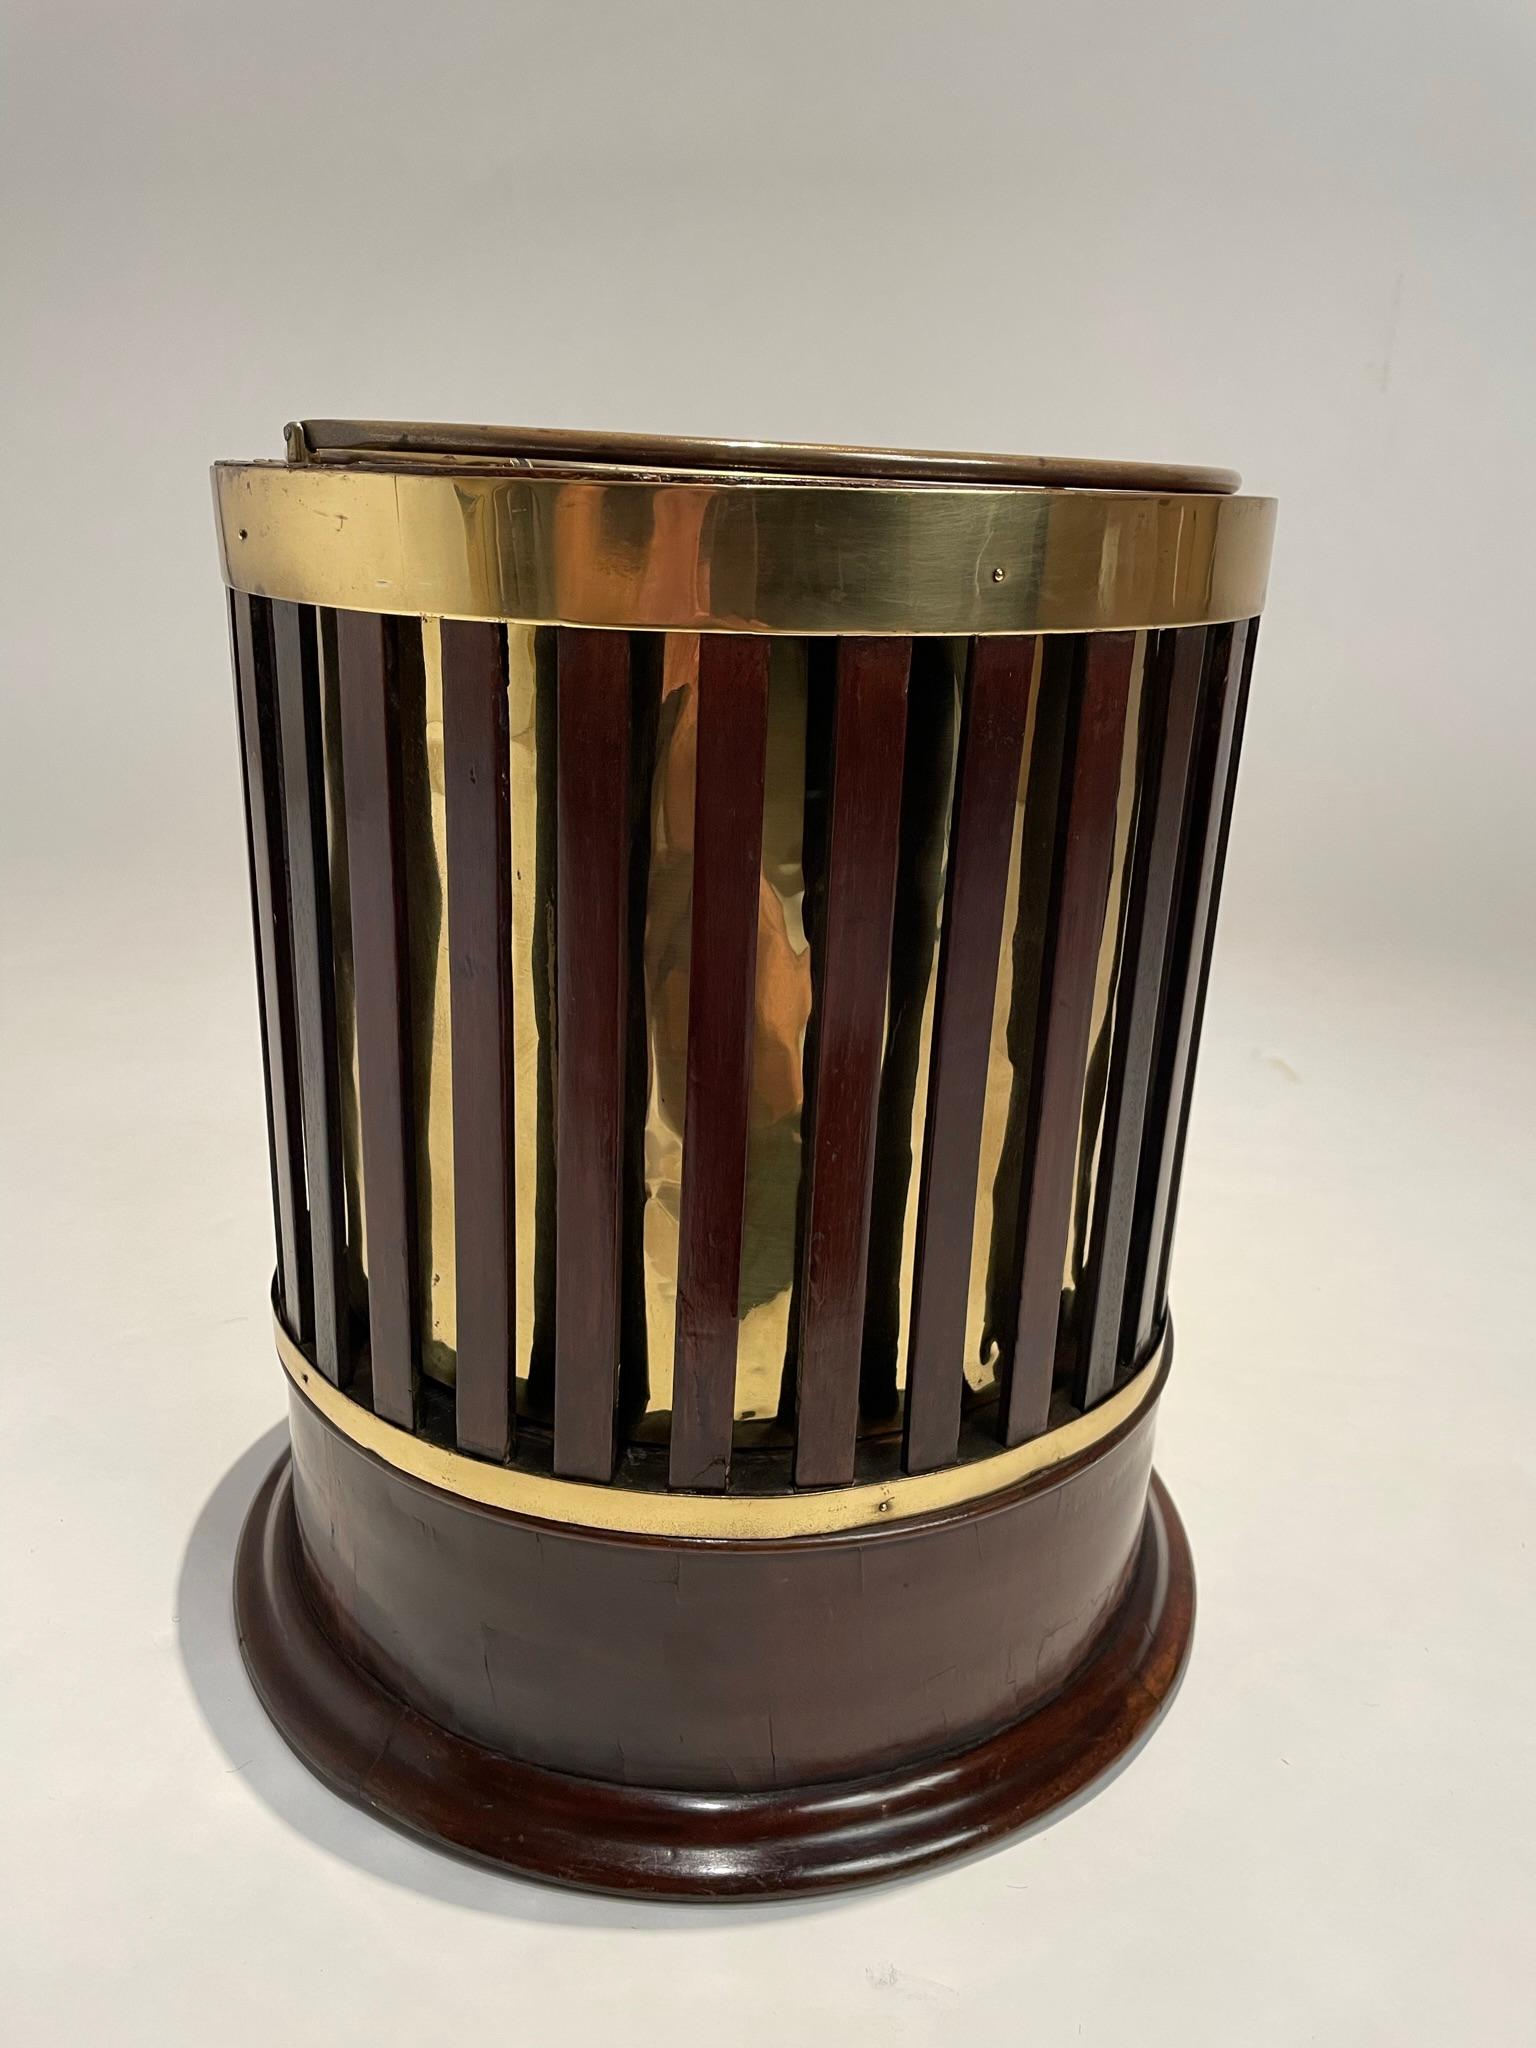 Hand-Crafted 19th Century English Regency Mahogany And Brass Bucket  For Sale